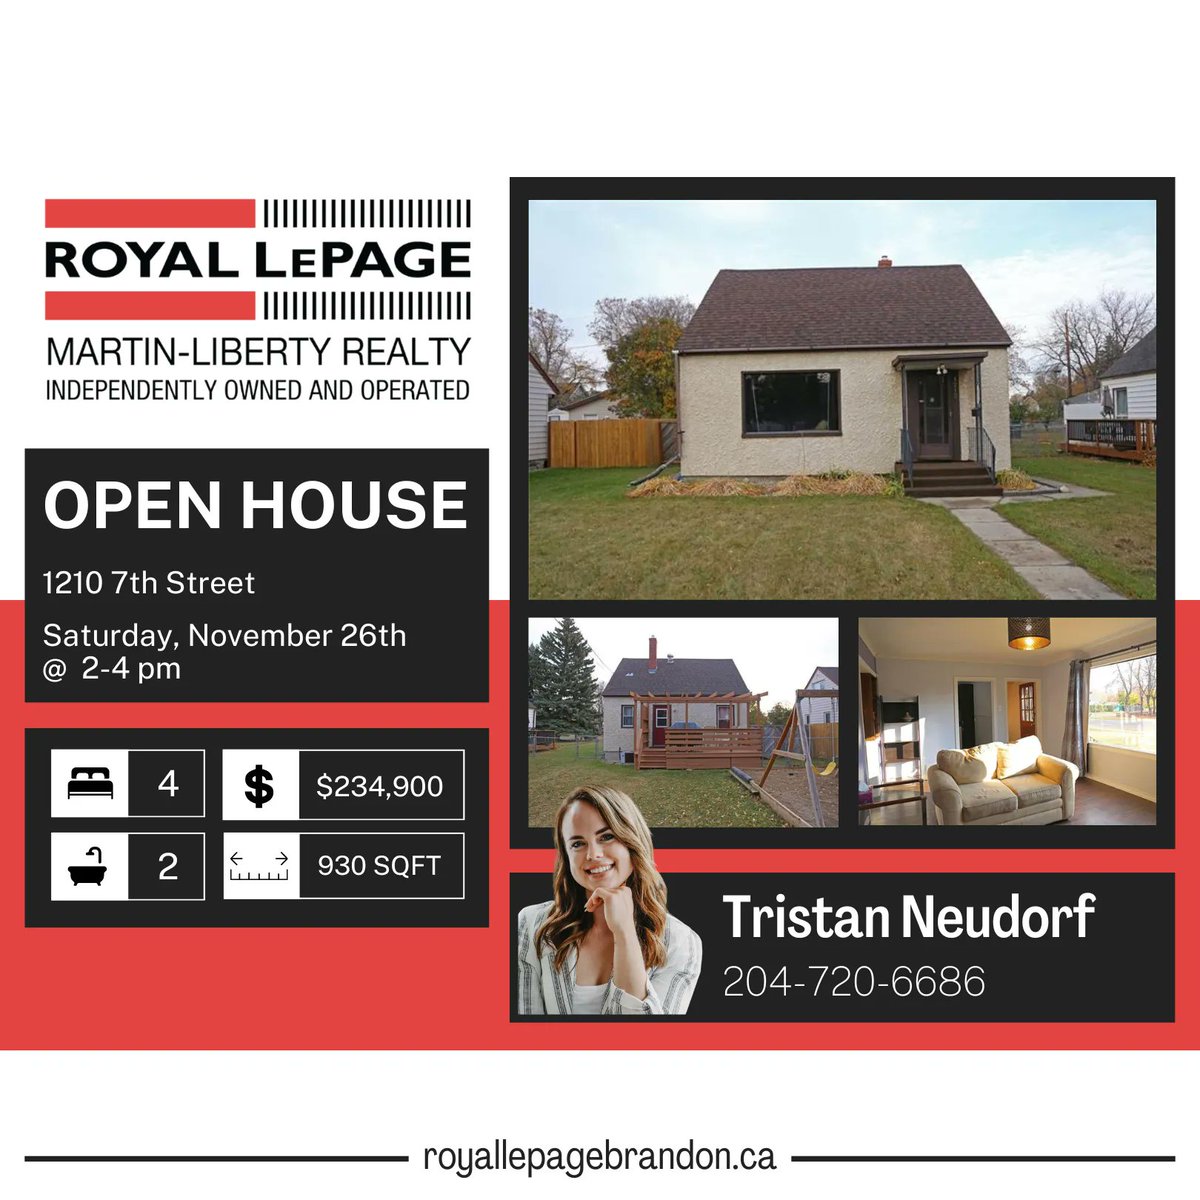 With weather like this, who wouldn't want to check out some open houses today? Here's what we have on this lovely Saturday! You can take a look at the full listings here 👉 royallepagebrandon.ca/open-houses/